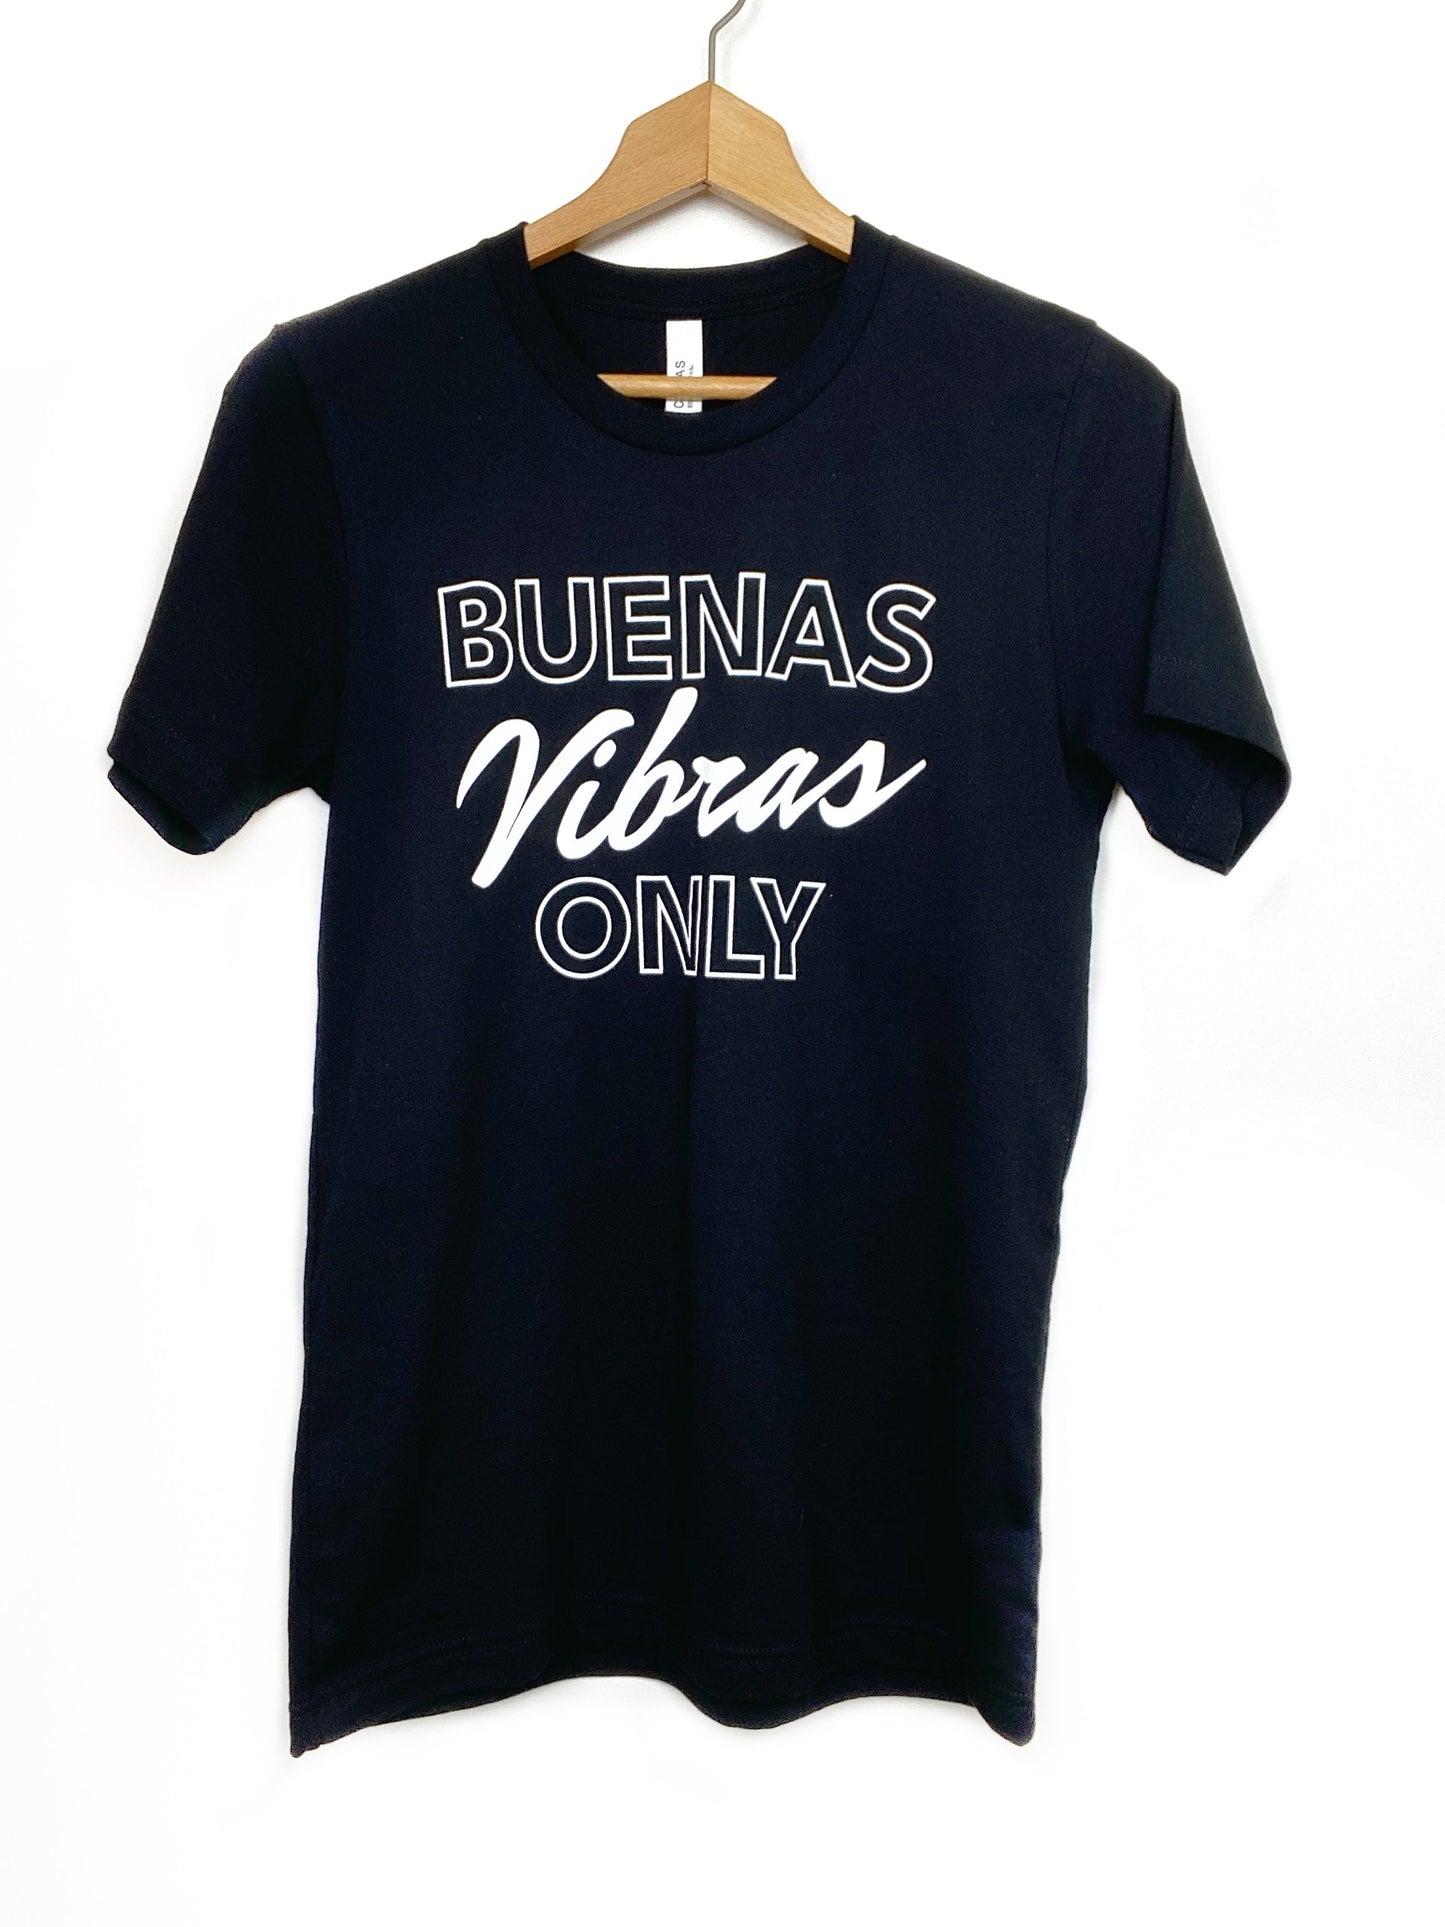 Buenas Vibras Only T-Shirt (Dusty Blue)